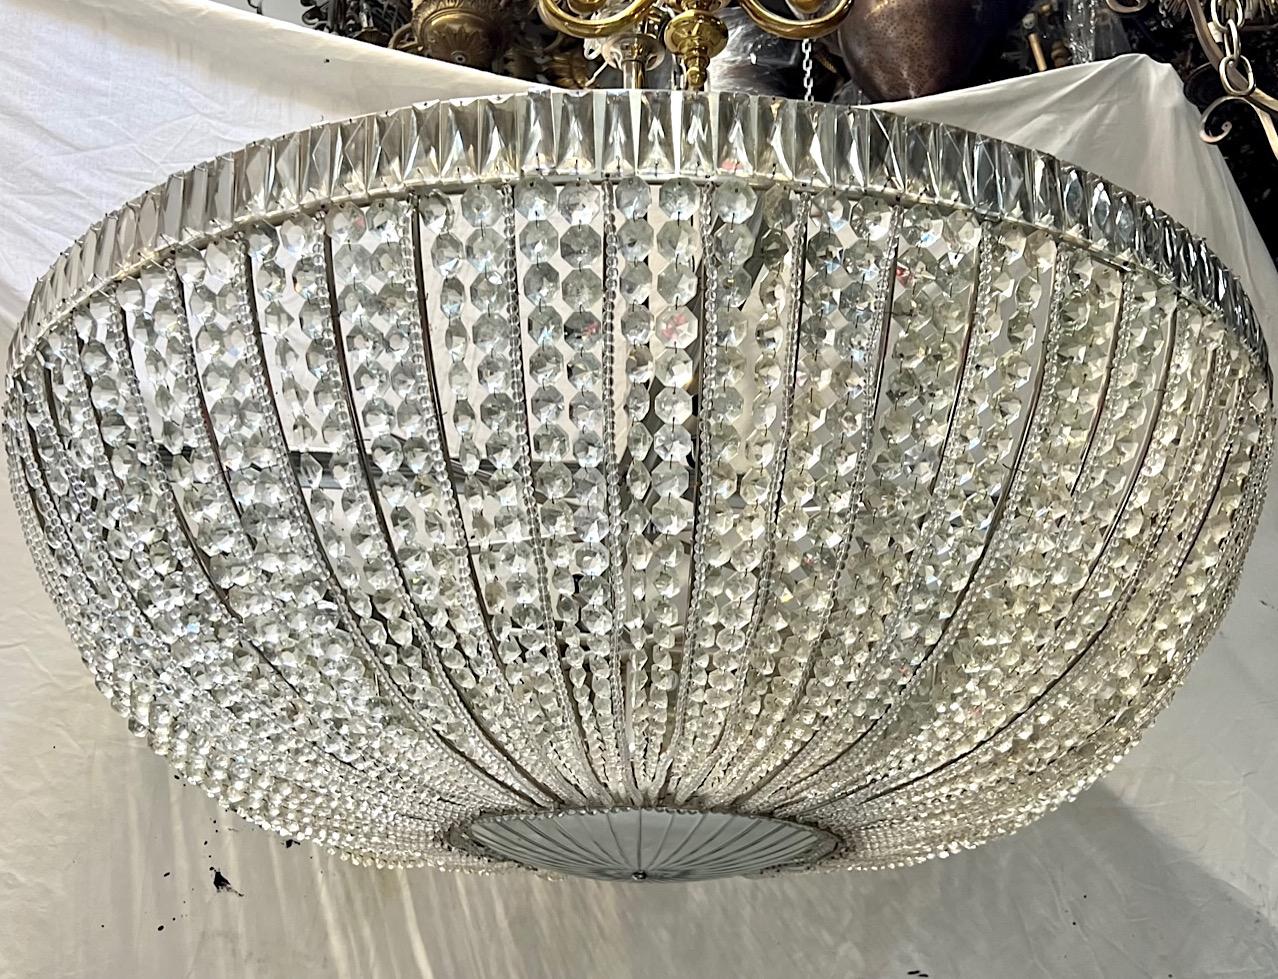 A French circa 1940's large crystal light fixture with silvered body, cut and mirrored crystal bottom inset and twenty-four interior candelabra lights.

Measurements:
Diameter: 48